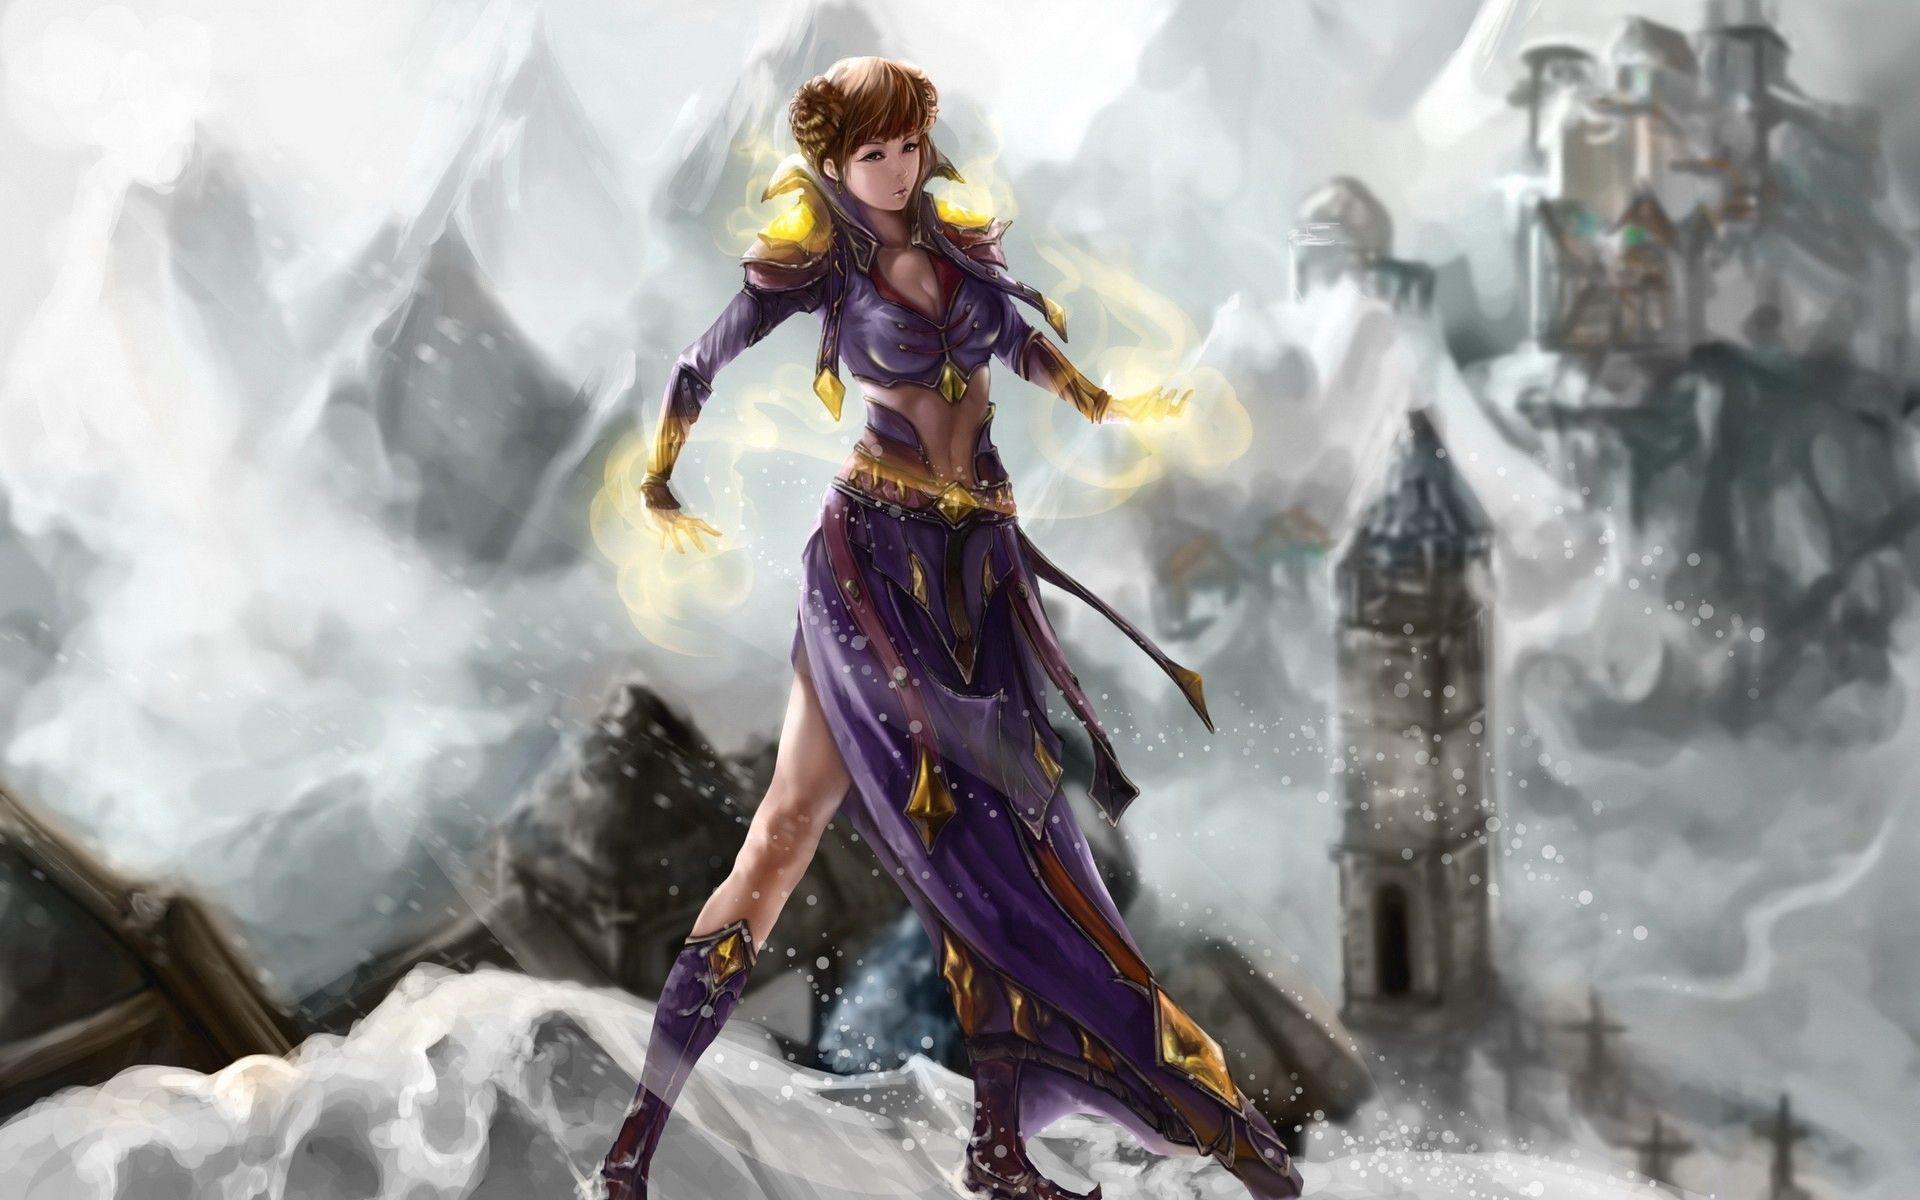 Mage, mountains, snow, castles, World of Warcraft, RPG, human